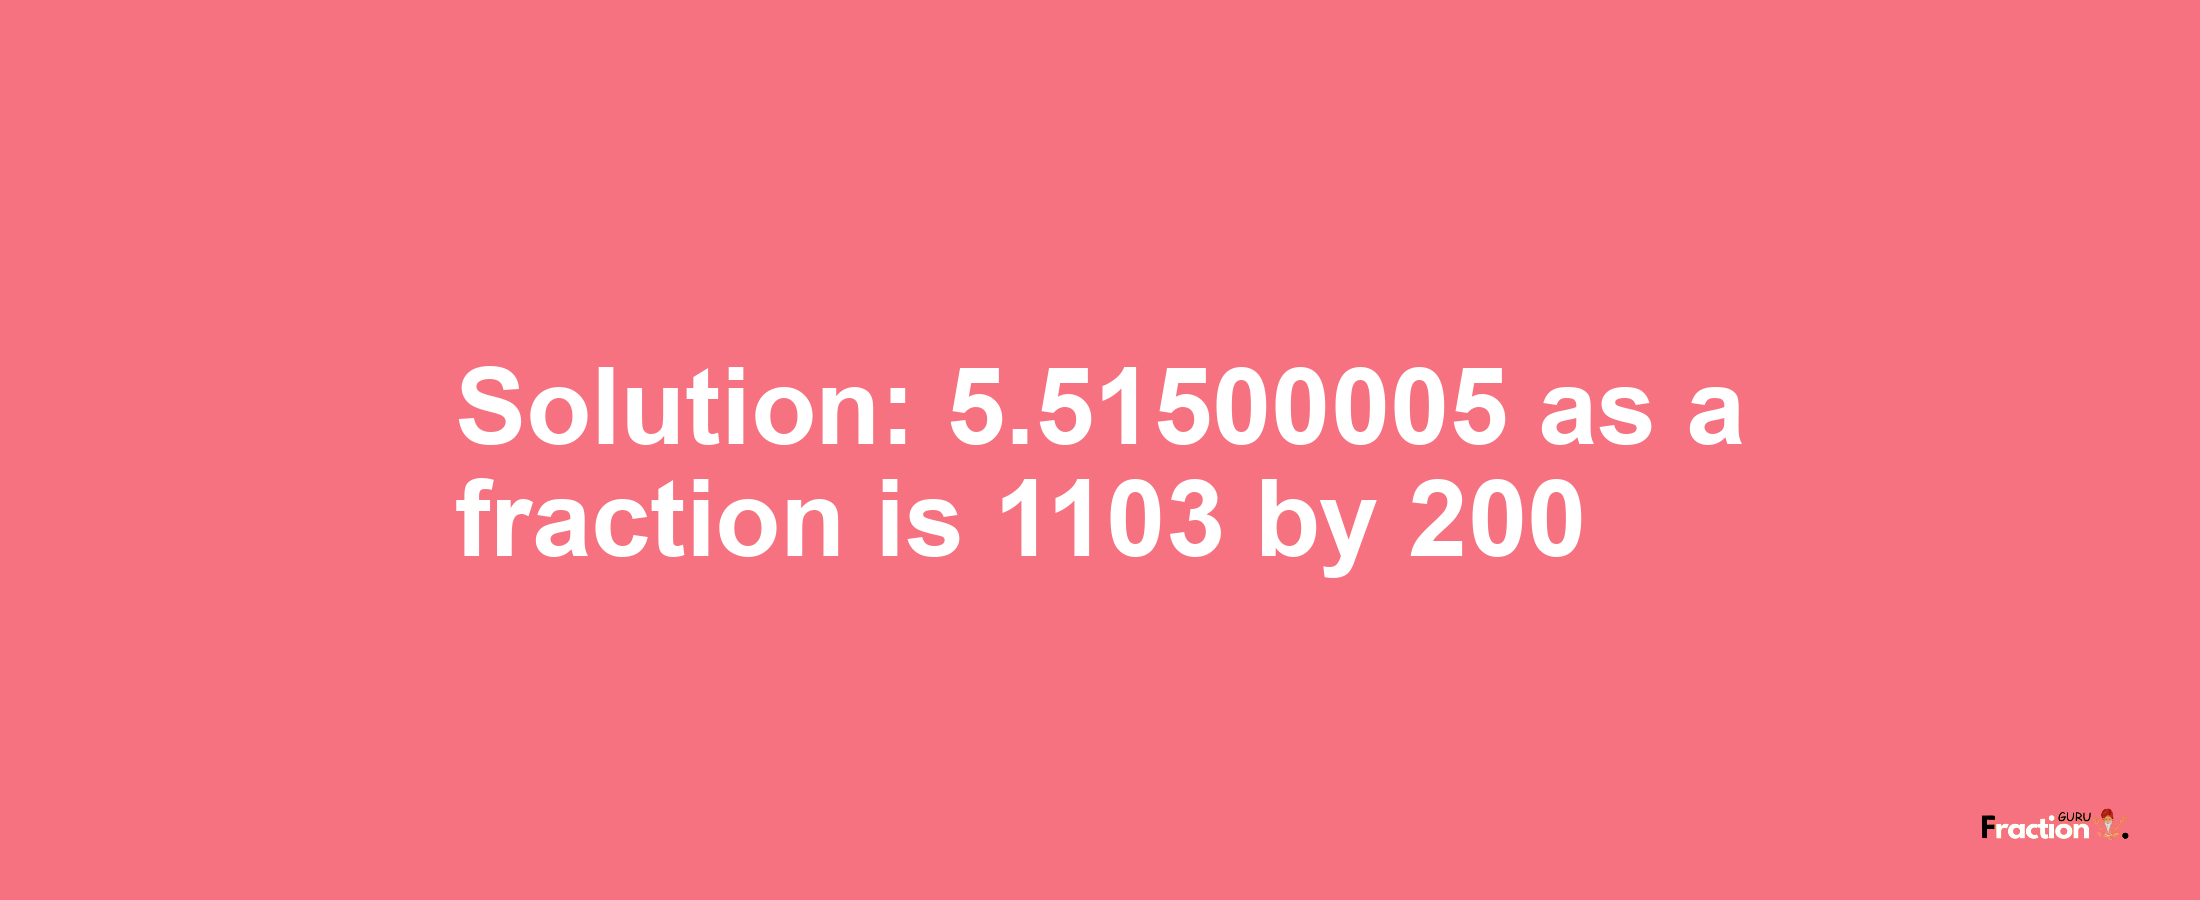 Solution:5.51500005 as a fraction is 1103/200